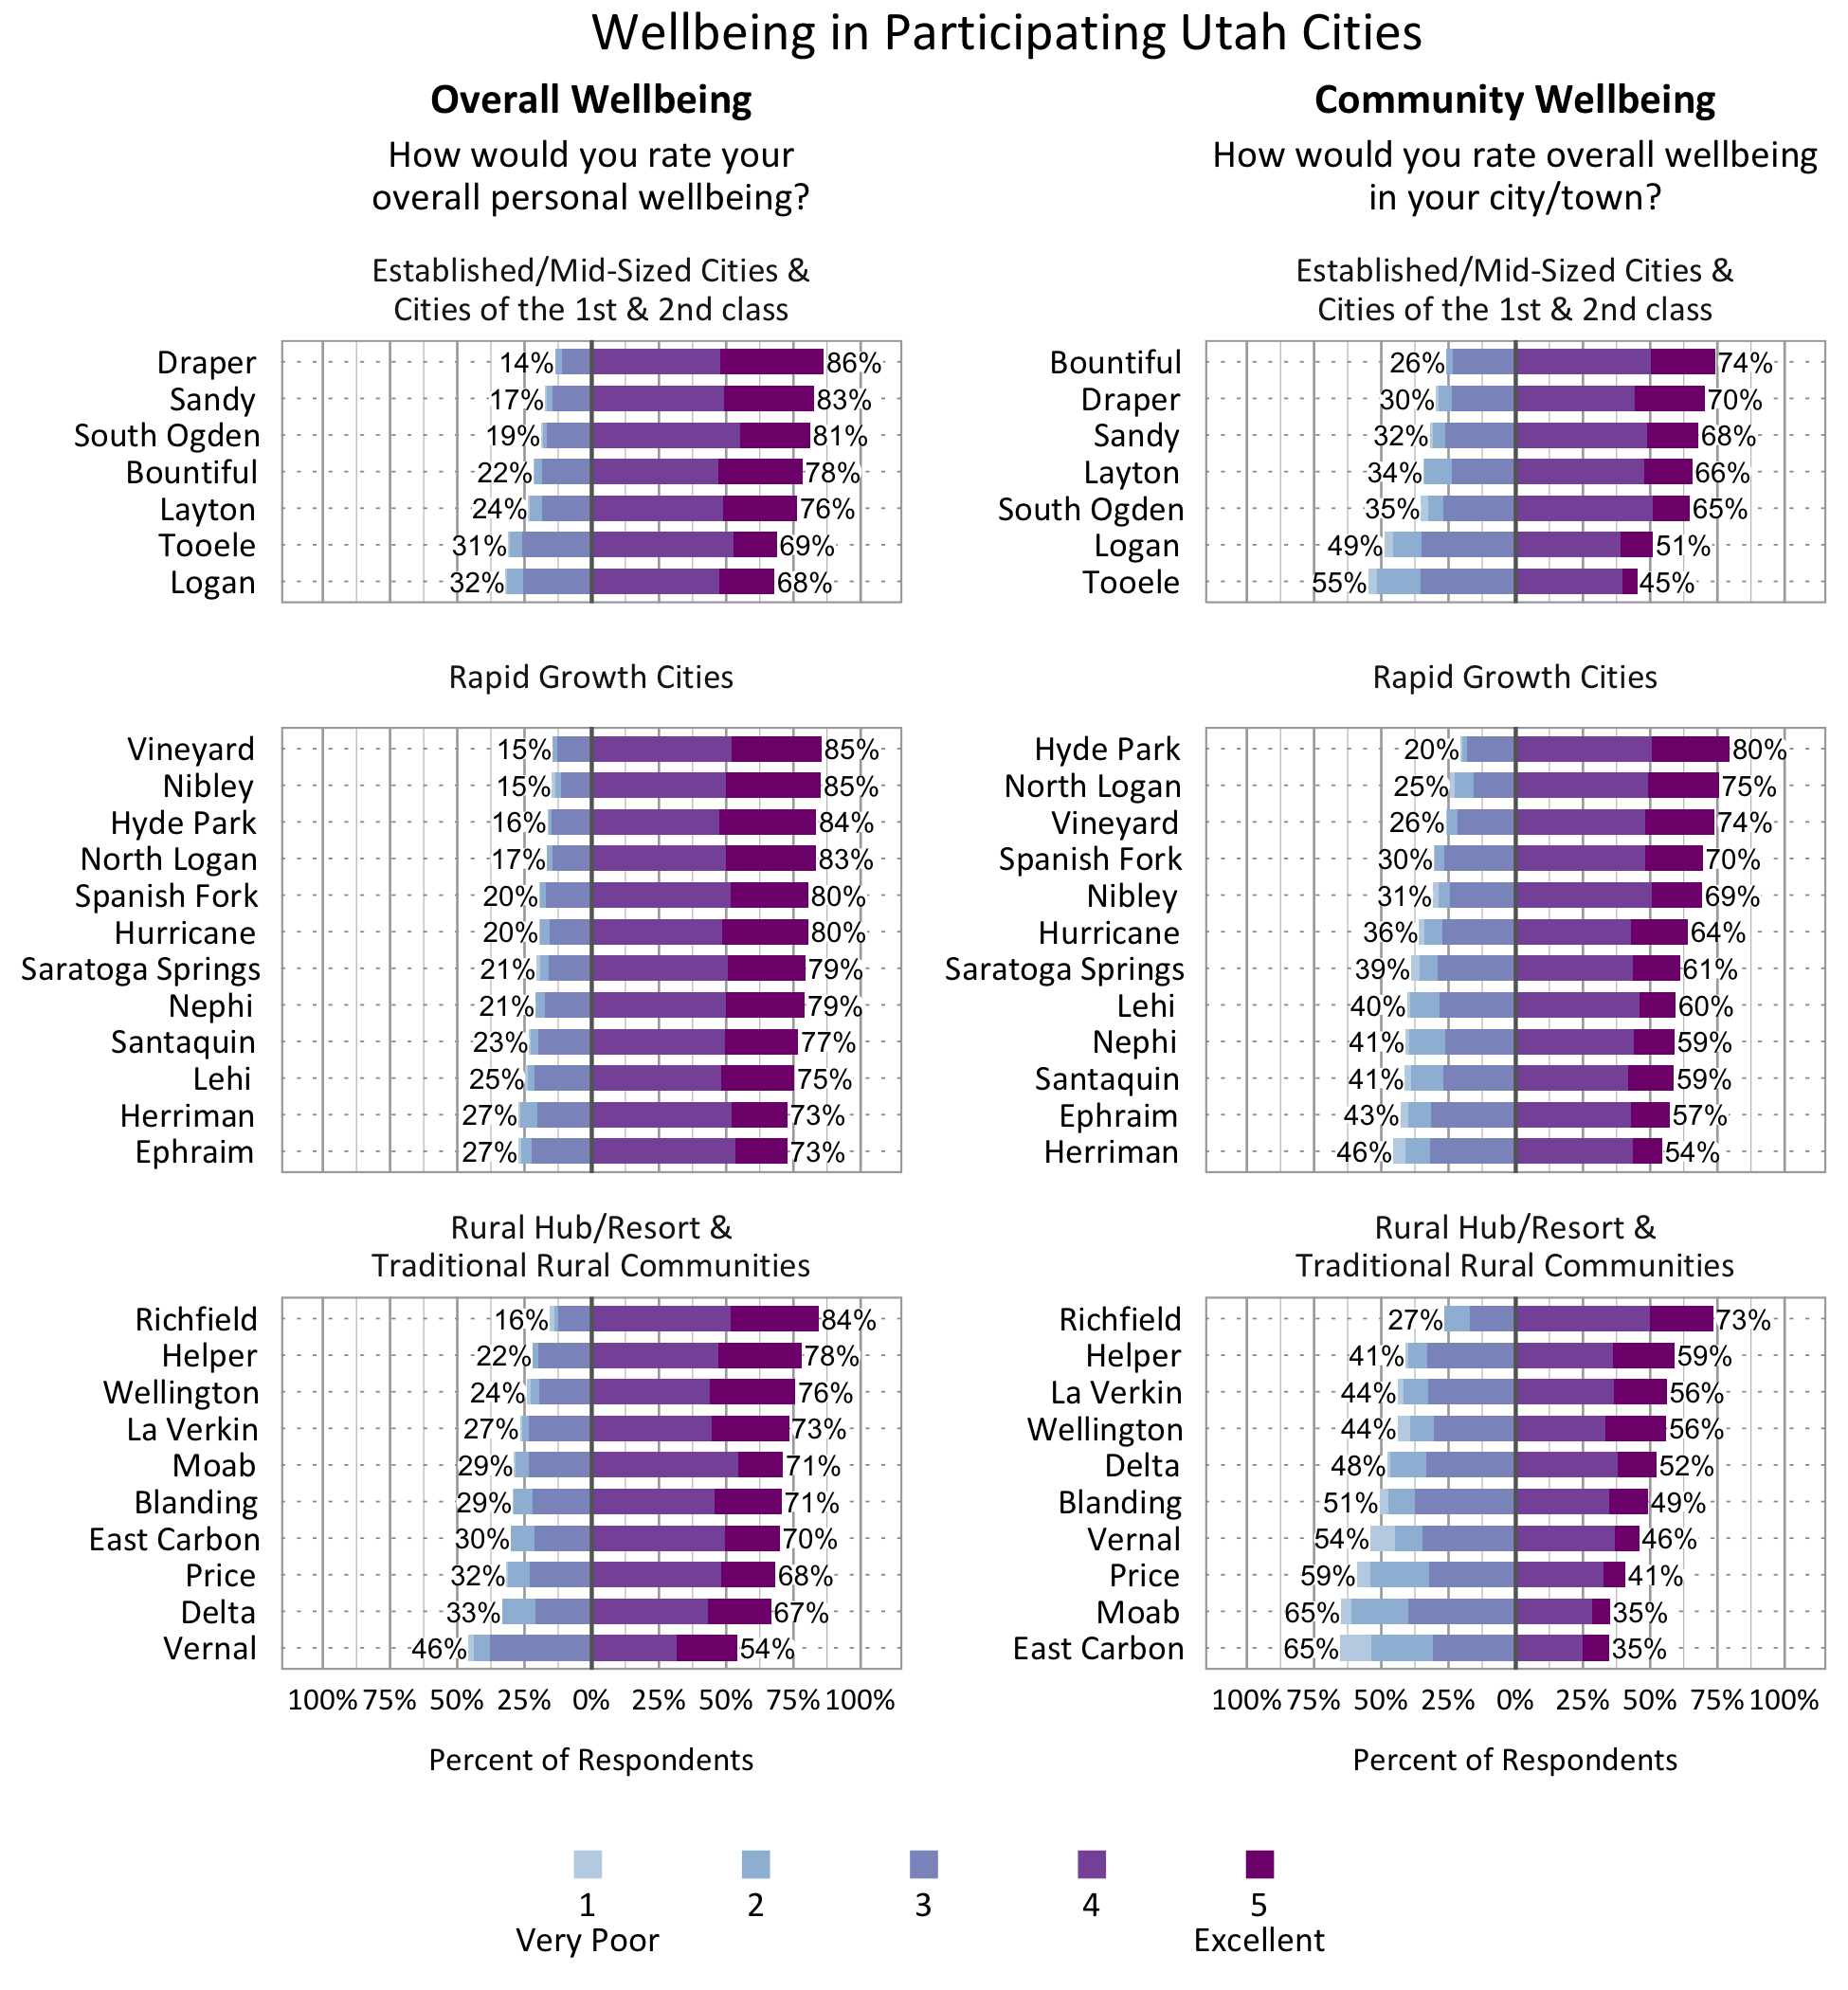 Type: Likert Graph. Title: Wellbeing in Participating Utah Cities. Subtitle: How would you rate your wellbeing 1 being very poor 5 being excellent? Data for Overall Wellbeing- Draper – 14% rated 1, 2, or 3 while 86% rated 4 or 5; Sandy - 17% rated 1,2, or 3 while 83% rated 4 or 5; South Ogden – 19% rated 1, 2, or 3 while 81% rated 4 or 5; Bountiful – 22% rated 1, 2, or 3 while 78% rated 4 or 5; Layton – 24% rated 1, 2, or 3 while 76% rated 4 or 5; Tooele – 31% rated 1, 2, or 3 while 69% rated 4 or 5; Logan – 32% rated 1, 2, or 3 while 86% rated 4 or 5; Vineyard – 15% rated 1, 2, or 3 while 85% rated 4 or 5; Nibley – 15% rated 1, 2, or 3 while 85% rated 4 or 5; Hyde Park – 16% rated 1, 2, or 3 while 84% rated 4 or 5; North Logan – 17% rated 1, 2, or 3 while 83% rated 4 or 5; Spanish Fork – 20% rated 1, 2, or 3 while 80% rated 4 or 5; Hurricane – 20% rated 1, 2, or 3 while 80% rated 4 or 5; Saratoga Springs – 21% rated 1, 2, or 3 while 79% rated 4 or 5; Nephi – 21% rated 1, 2, or 3 while 79% rated 4 or 5; Santaquin – 23% rated 1, 2, or 3 while 77% rated 4 or 5; Lehi – 25% rated 1, 2, or 3 while 75% rated 4 or 5; Herriman – 27% rated 1, 2, or 3 while 73% rated 4 or 5; Ephraim – 27% rated 1, 2, or 3 while 73% rated 4 or 5; Richfield – 16% rated 1, 2, or 3 while 84% rated 4 or 5; Helper – 22% rated 1, 2, or 3 while 78% rated 4 or 5; Wellington – 24% rated 1, 2, or 3 while 76% rated 4 or 5; La Verkin – 27% rated 1, 2, or 3 while 73% rated 4 or 5; Moab – 29% rated 1, 2, or 3 while 71% rated 4 or 5; Blanding – 29% rated 1, 2, or 3 while 71% rated 4 or 5; East Carbon – 30% rated 1, 2, or 3 while 70% rated 4 or 5; Price – 32% rated 1, 2, or 3 while 68% rated 4 or 5; Delta – 33% rated 1, 2, or 3 while 67% rated 4 or 5; Vernal – 46% rated 1, 2, or 3 while 54% rated 4 or 5. Data for Community Wellbeing – Bountiful – 26% rated 1, 2, or 3 while 74% rated 4 or 5; Draper – 30% rated 1, 2, or 3 while 70% rated 4 or 5; Sandy – 32% rated 1, 2, or 3 while 68% rated 4 or 5; Layton – 34% rated 1, 2, or 3 while 66% rated 4 or 5; South Ogden – 35% rated 1, 2, or 3 while 65% rated 4 or 5; Logan – 49% rated 1, 2, or 3 while 51% rated 4 or 5; Tooele – 55% rated 1, 2, or 3 while 45% rated 4 or 5; Hyde Park – 20% rated 1, 2, or 3 while 80% rated 4 or 5; North Logan – 25% rated 1, 2, or 3 while 75% rated 4 or 5; Vineyard – 26% rated 1, 2, or 3 while 74% rated 4 or 5; Spanish Fork – 30% rated 1, 2, or 3 while 70% rated 4 or 5; Nibley – 31% rated 1, 2, or 3 while 69% rated 4 or 5; Hurricane – 36% rated 1, 2, or 3 while 64% rated 4 or 5; Saratoga Springs – 39% rated 1, 2, or 3 while 61% rated 4 or 5; Lehi – 40% rated 1, 2, or 3 while 60% rated 4 or 5; Nephi – 41% rated 1, 2, or 3 while 59% rated 4 or 5; Santaquin – 41% rated 1, 2, or 3 while 59% rated 4 or 5; Ephraim – 43% rated 1, 2, or 3 while 57% rated 4 or 5; Herriman – 46% rated 1, 2, or 3 while 54% rated 4 or 5; Richfield – 27% rated 1, 2, or 3 while 73% rated 4 or 5; Helper – 41% rated 1, 2, or 3 while 59% rated 4 or 5; La Verkin – 44% rated 1, 2, or 3 while 56% rated 4 or 5; Wellington – 44% rated 1, 2, or 3 while 56% rated 4 or 5; Delta – 48% rated 1, 2, or 3 while 52% rated 4 or 5; Blanding – 51% rated 1, 2, or 3 while 49% rated 4 or 5; Vernal – 54% rated 1, 2, or 3 while 46% rated 4 or 5; Price – 59% rated 1, 2, or 3 while 41% rated 4 or 5; Moab – 65% rated 1, 2, or 3 while 35% rated 4 or 5; East Carbon– 65% rated 1, 2, or 3 while 35% rated 4 or 5;